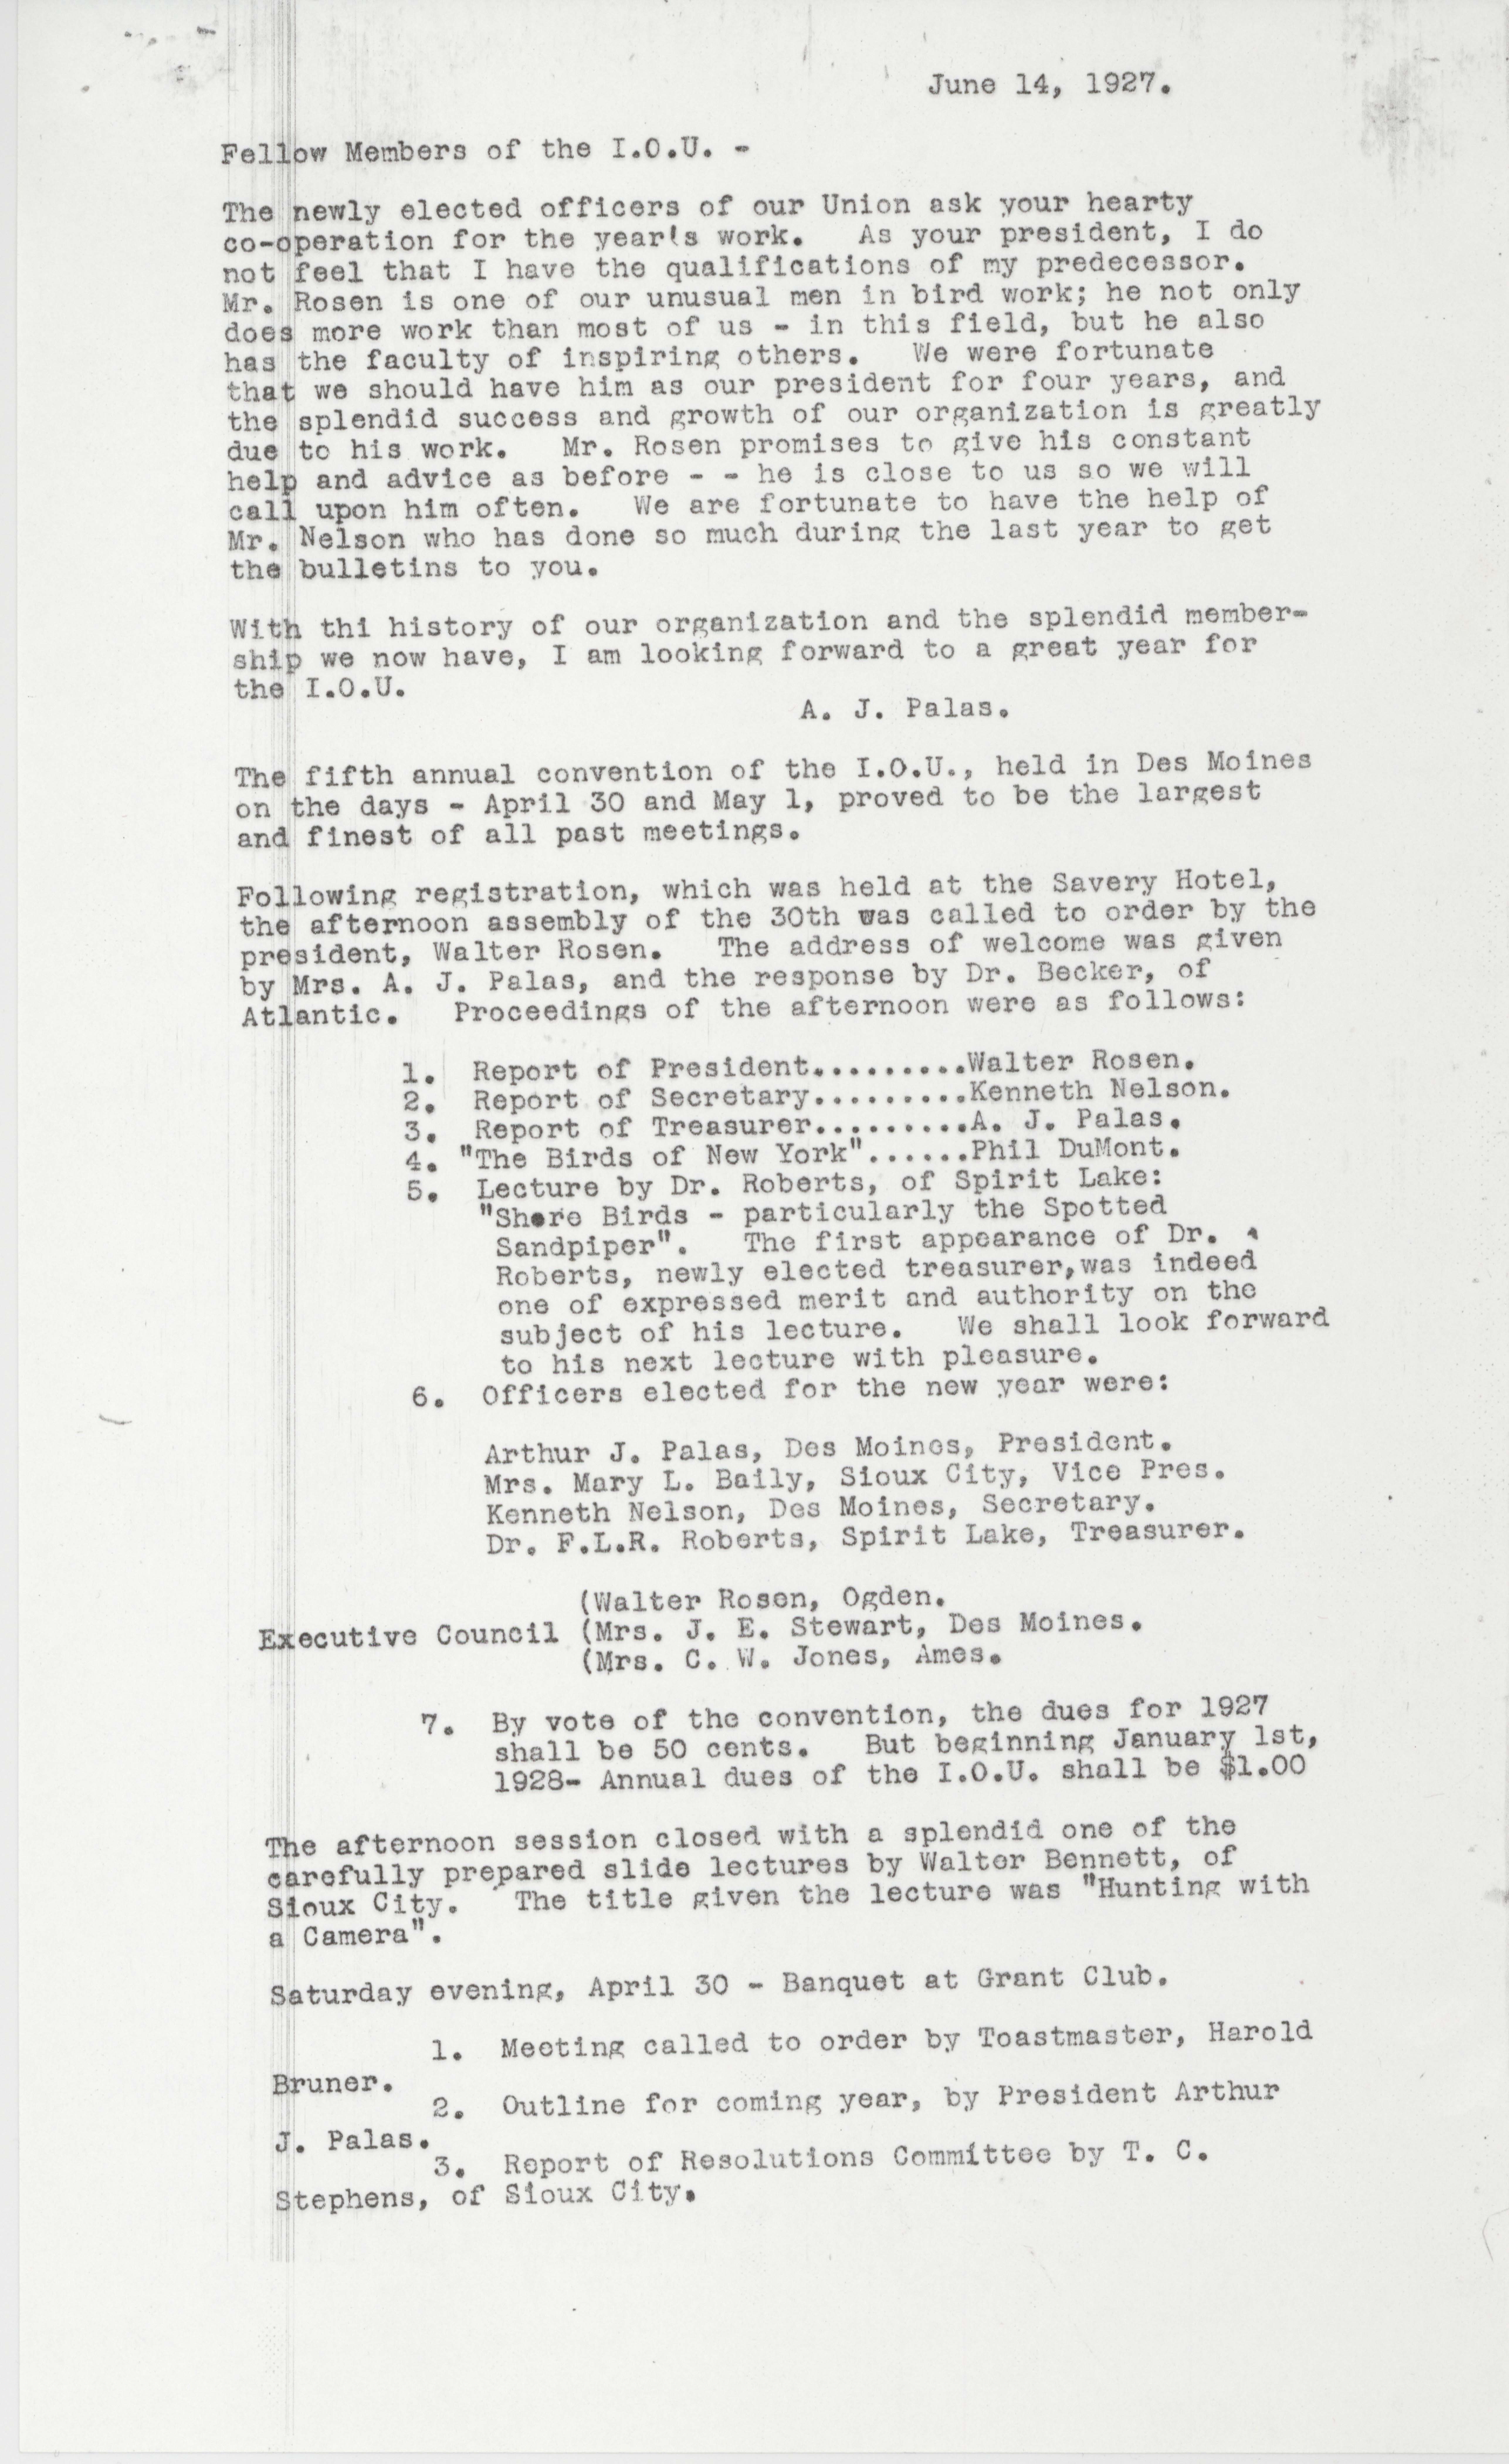 Letter to members of the Iowa Ornithologists' Union regarding the annual convention, June 14, 1927